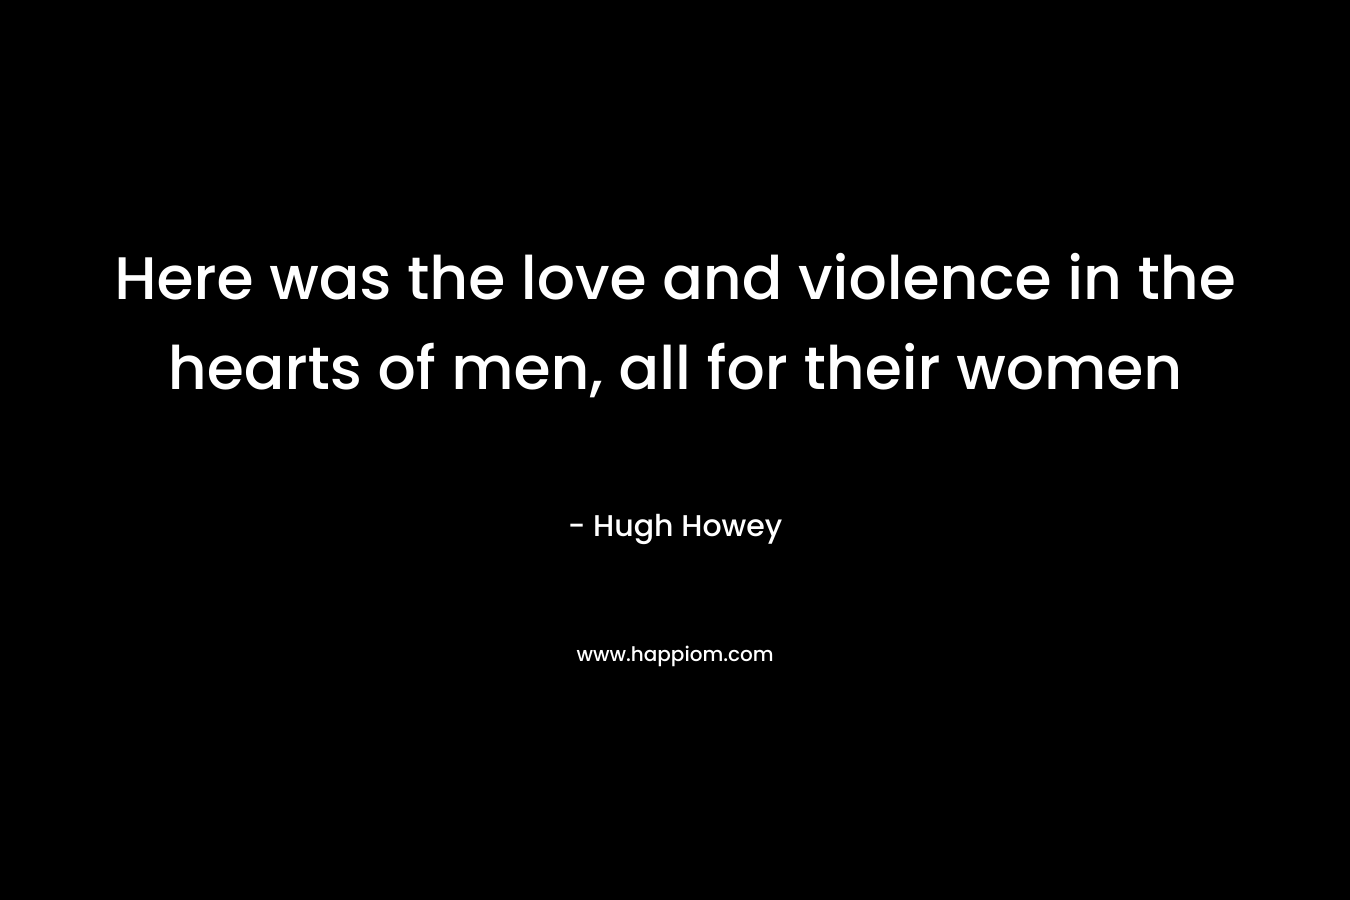 Here was the love and violence in the hearts of men, all for their women – Hugh Howey